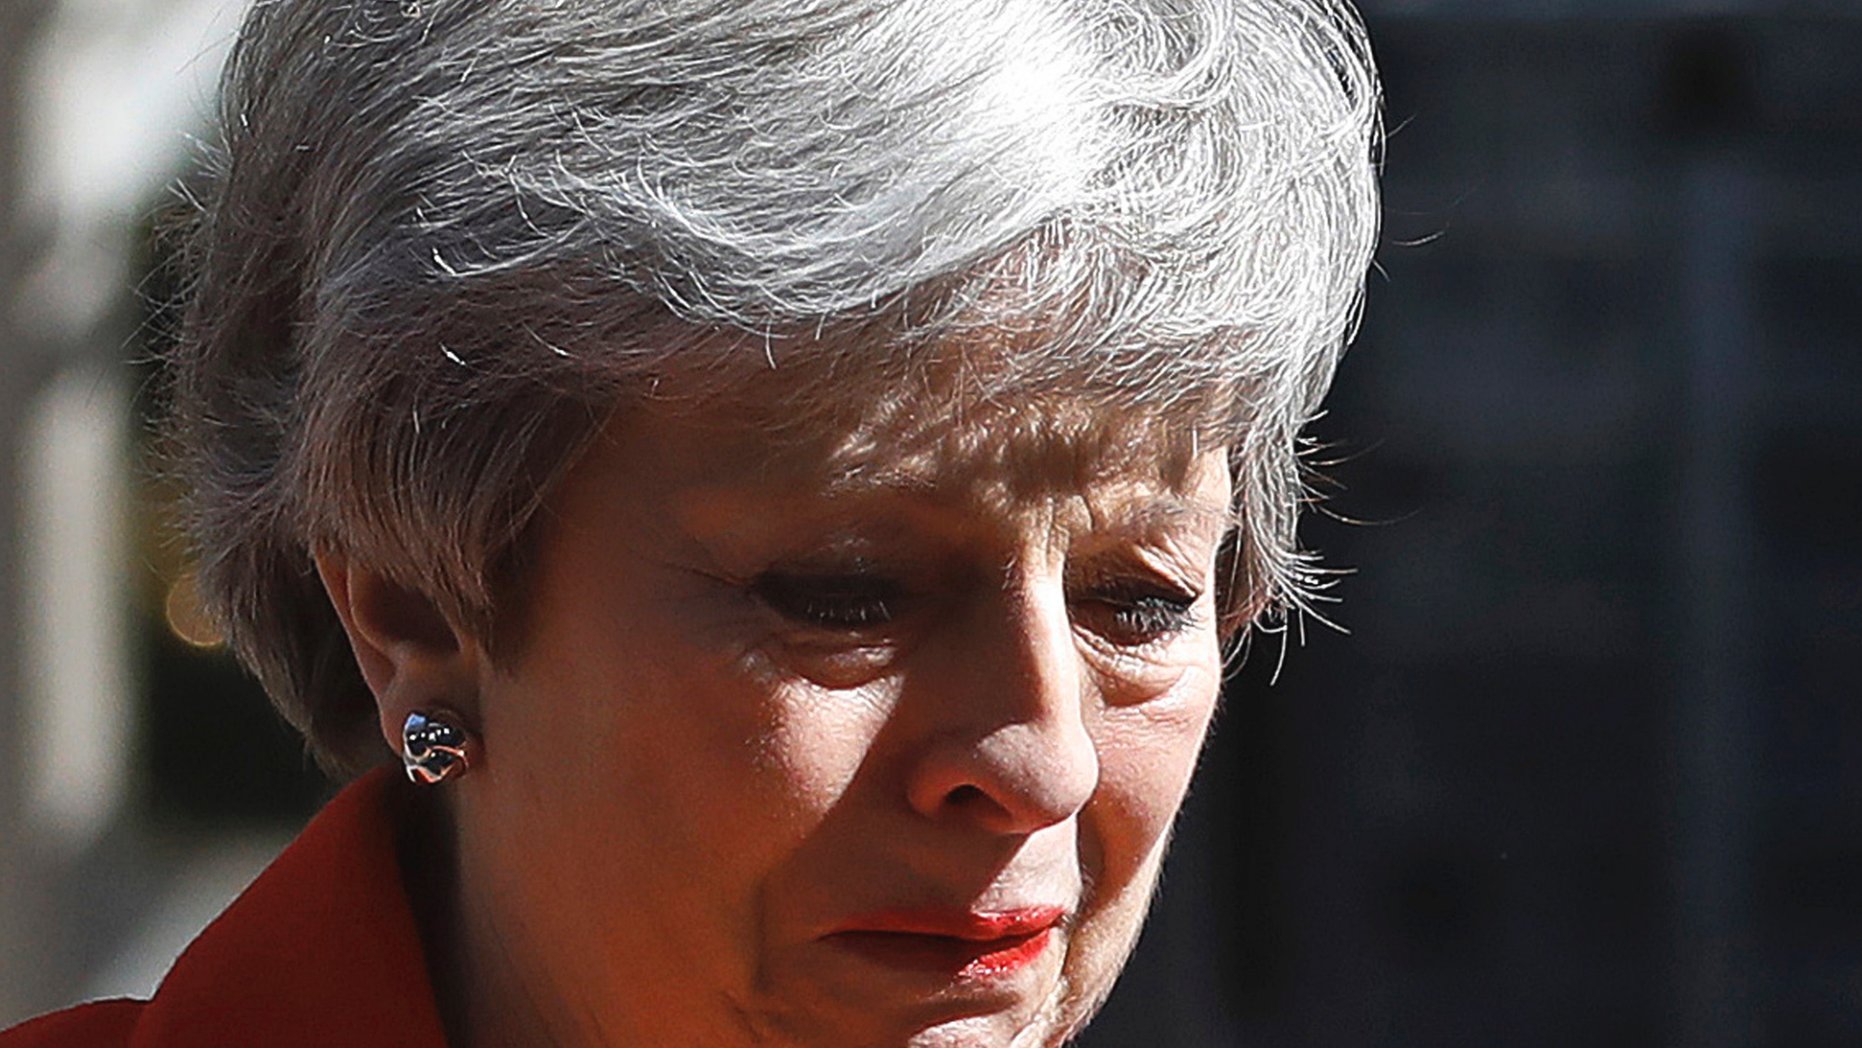 FILE - In this Friday, May 24, 2019 file photo, British Prime Minister Theresa May reacts as she turns away after making a speech in the street outside 10 Downing Street in London, England. May formally steps down as Conservative Party leader on Friday, June 7, 2019 defeated by the Brexit conundrum. No public event is planned to mark the occasion as May’s time at the helm ends, not with a bang but a whimper. (AP Photo/Alastair Grant, File)